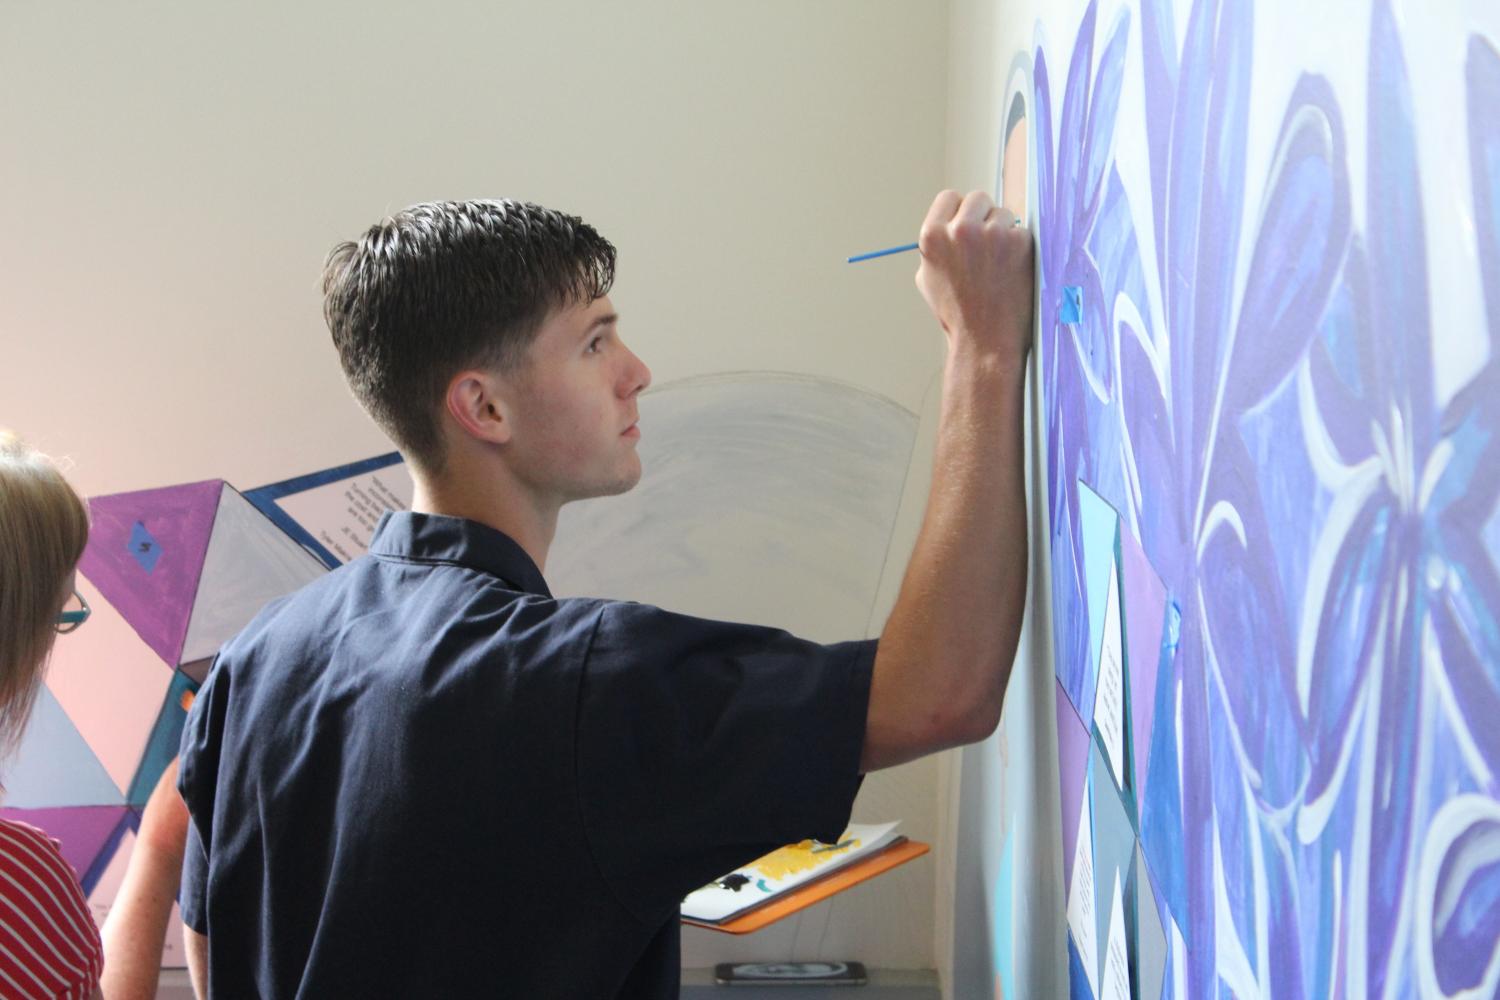 Edward Emery ’17 works on the mural at the Pine & Octavia campus. Emery assisted Artist-in-Residence Patter Hellstrom in finishing the mural that every junior has contributed to.